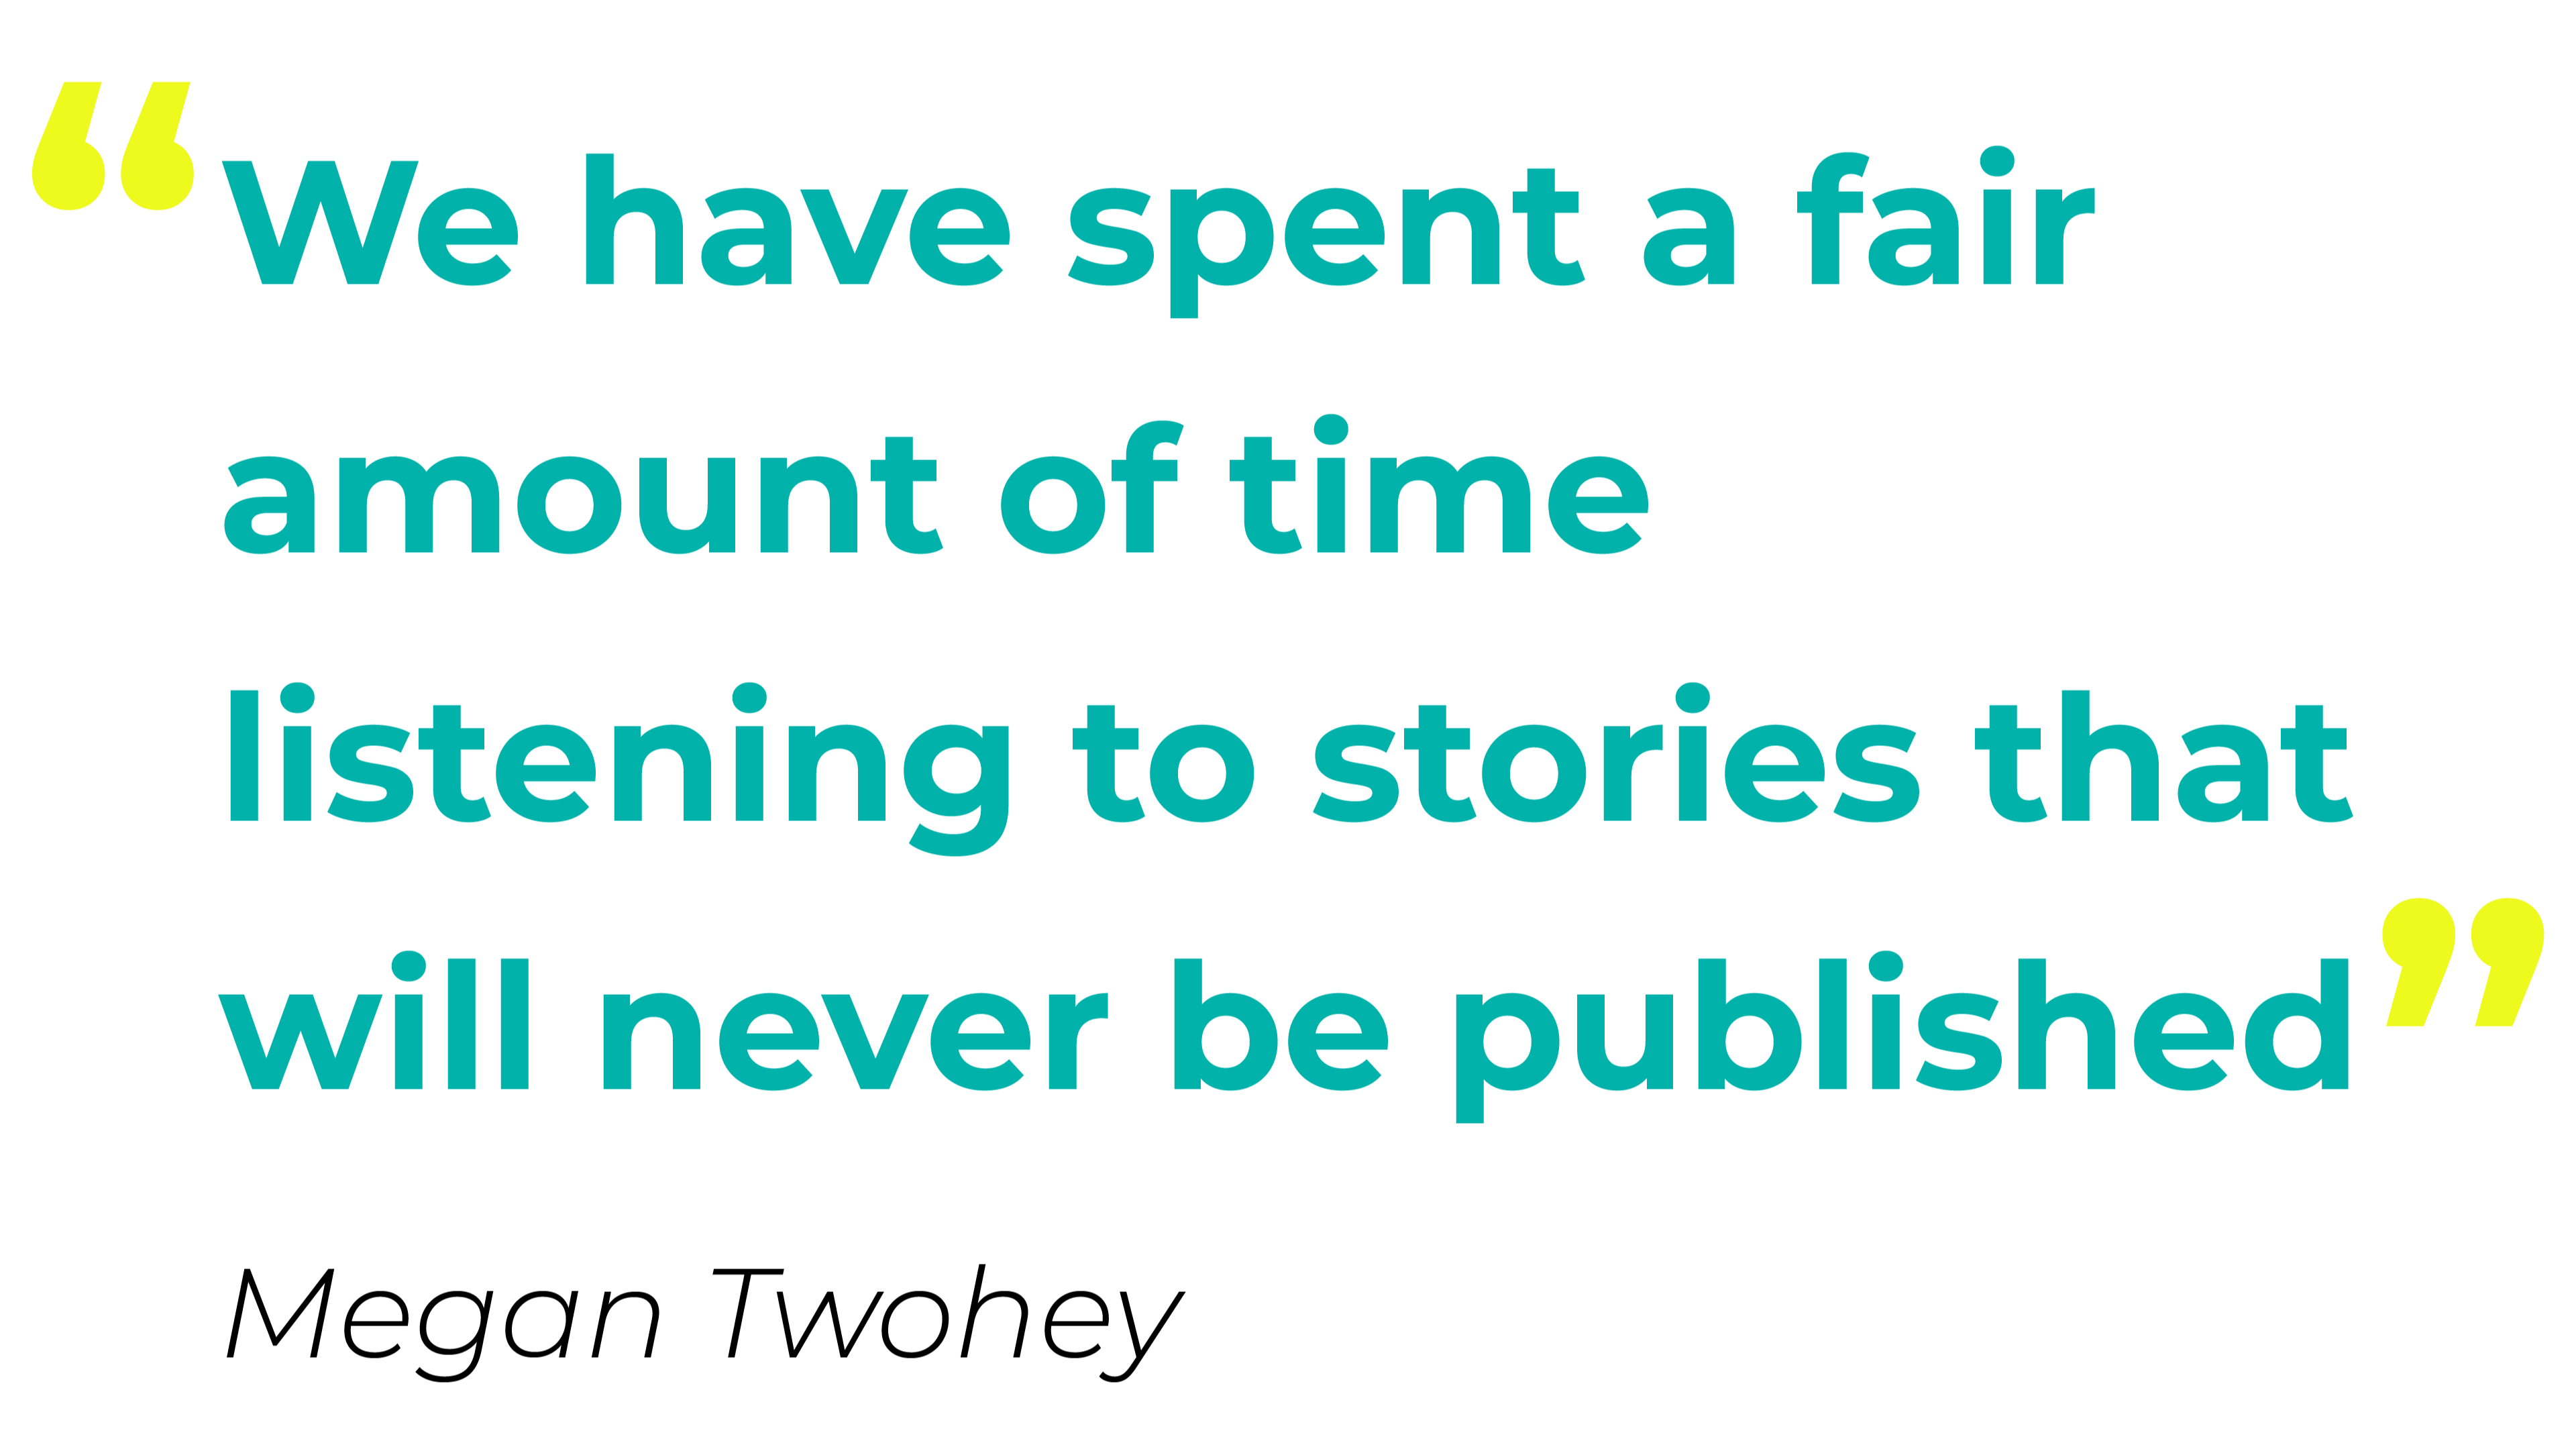 "We have spent a fair amount of time listening to stories that will never be published" - Megan Twohey